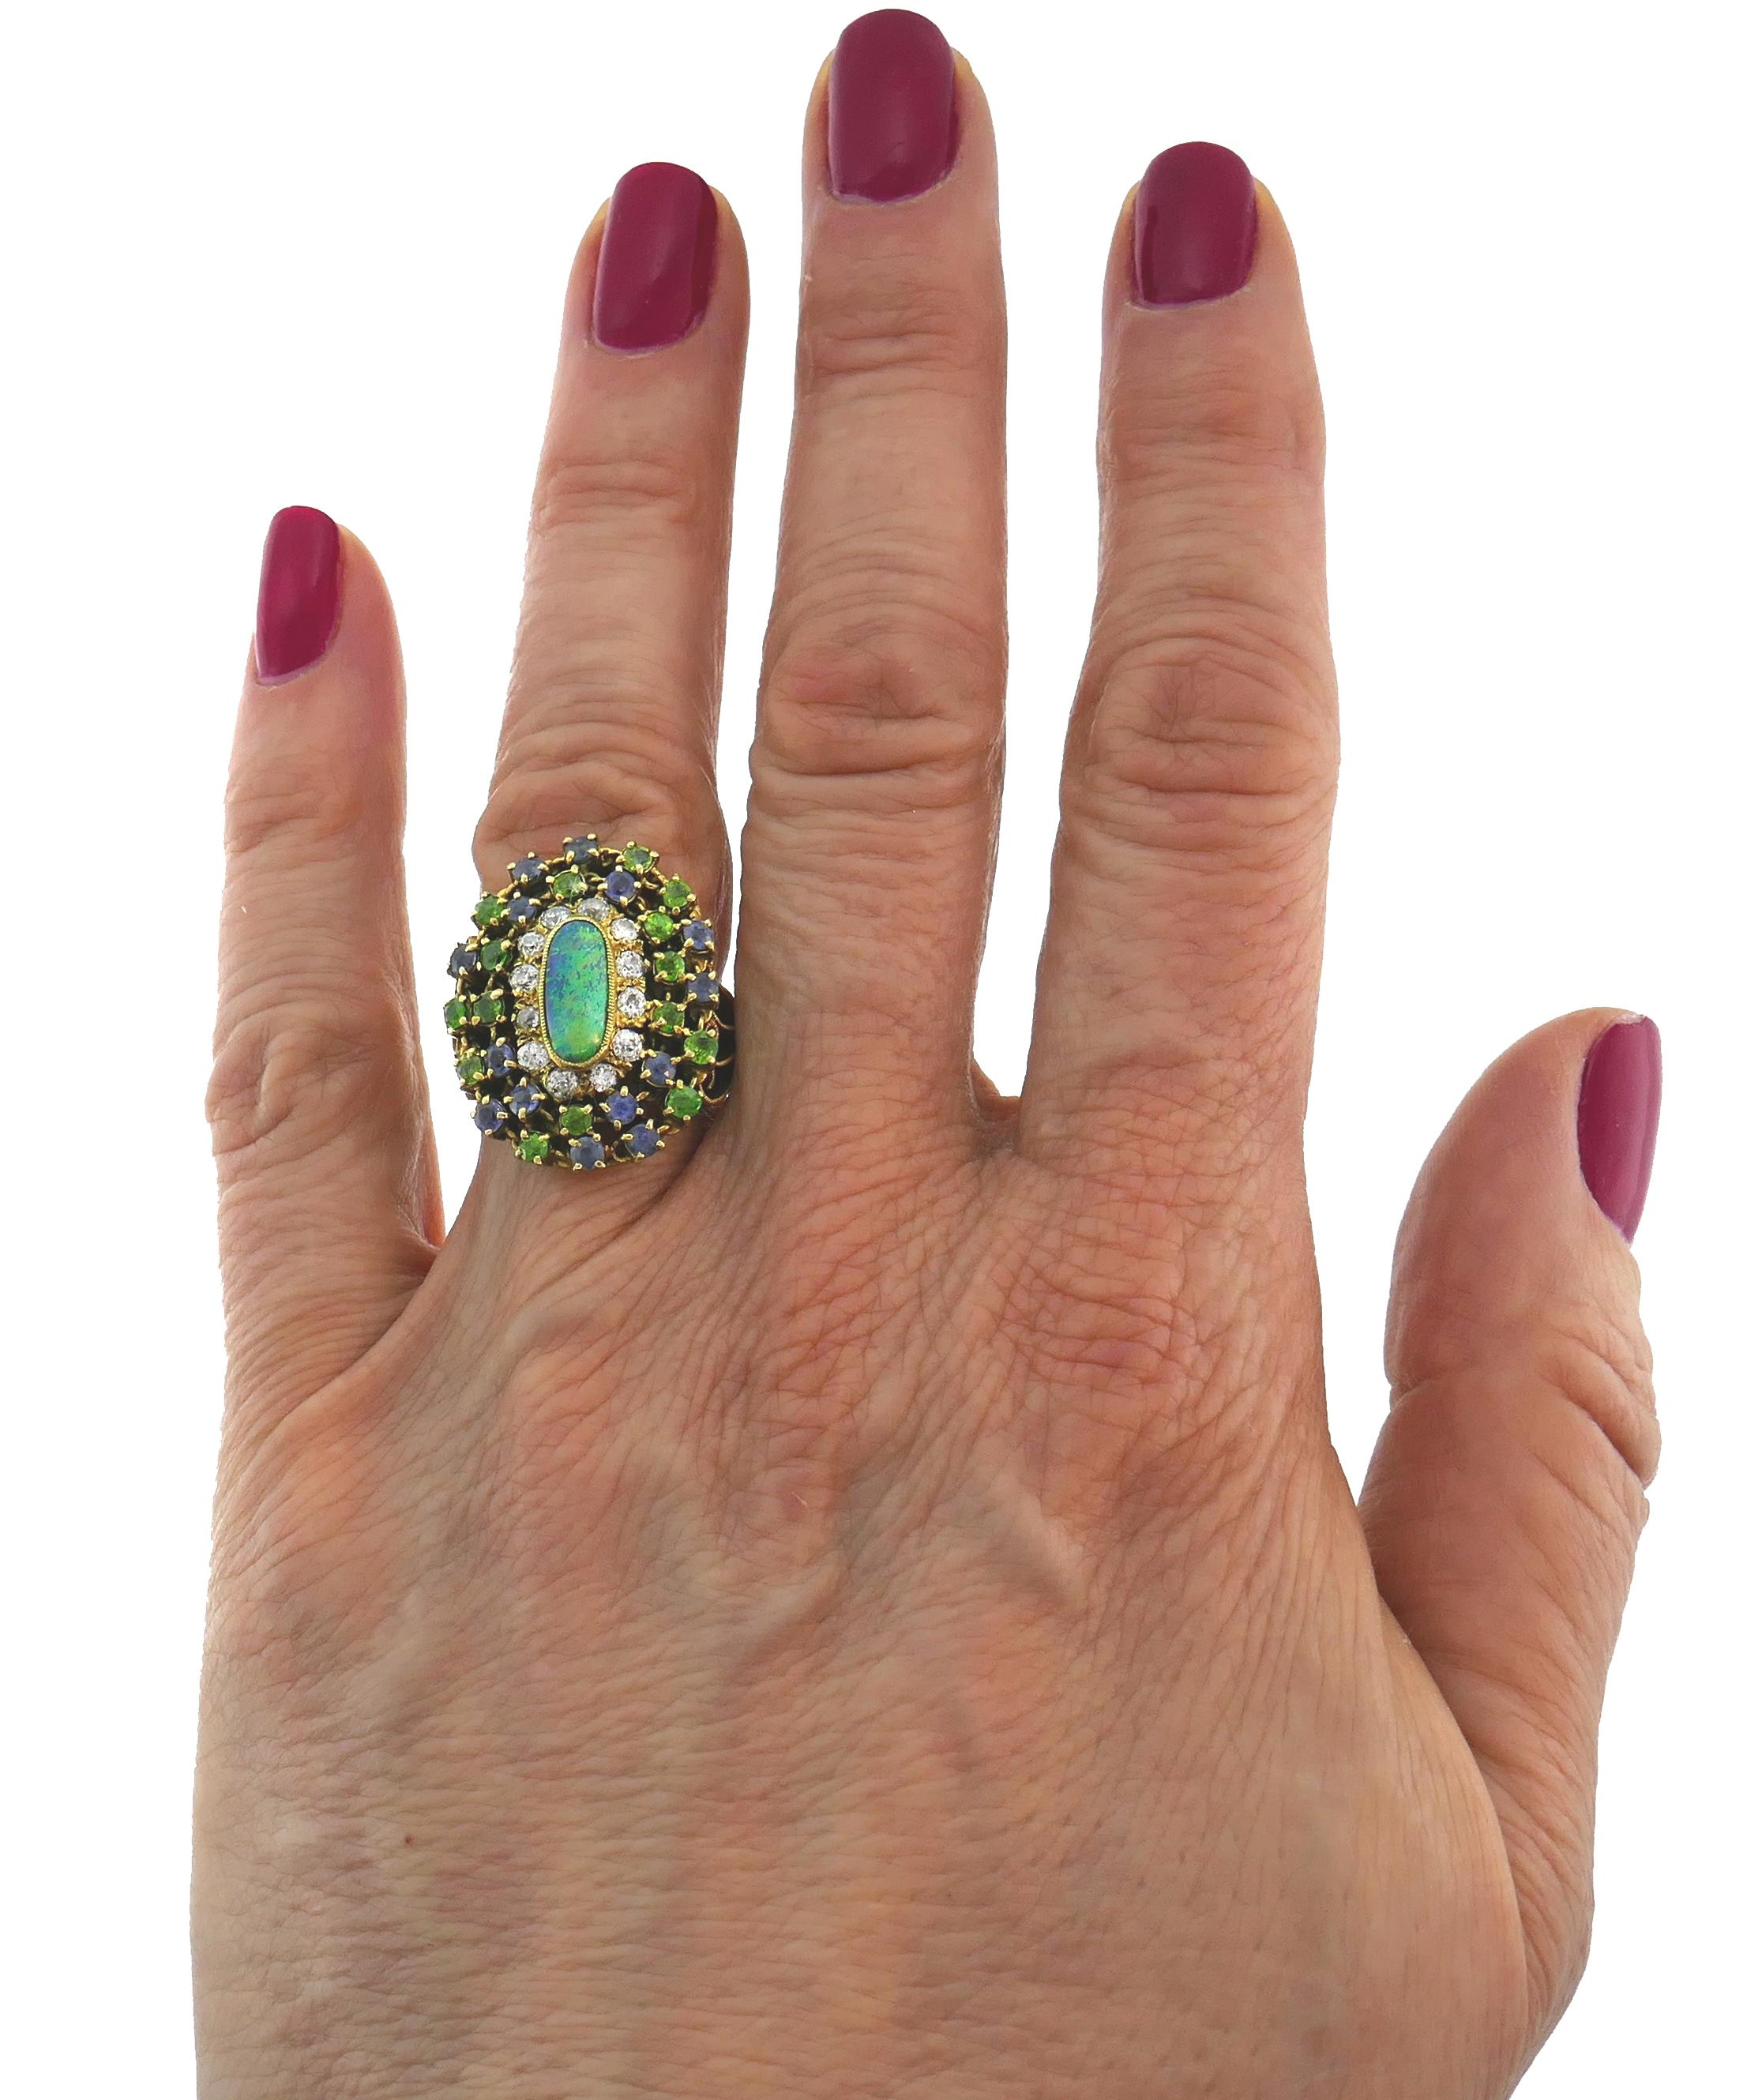 Beautiful rare ring created by Tiffany & Co. in the late 1960s. Elegant and timeless, the ring is a great addition to your jewelry collection. 
The ring features a lovely elongated opal framed by a row of 12 Old European cut diamonds and two rows of